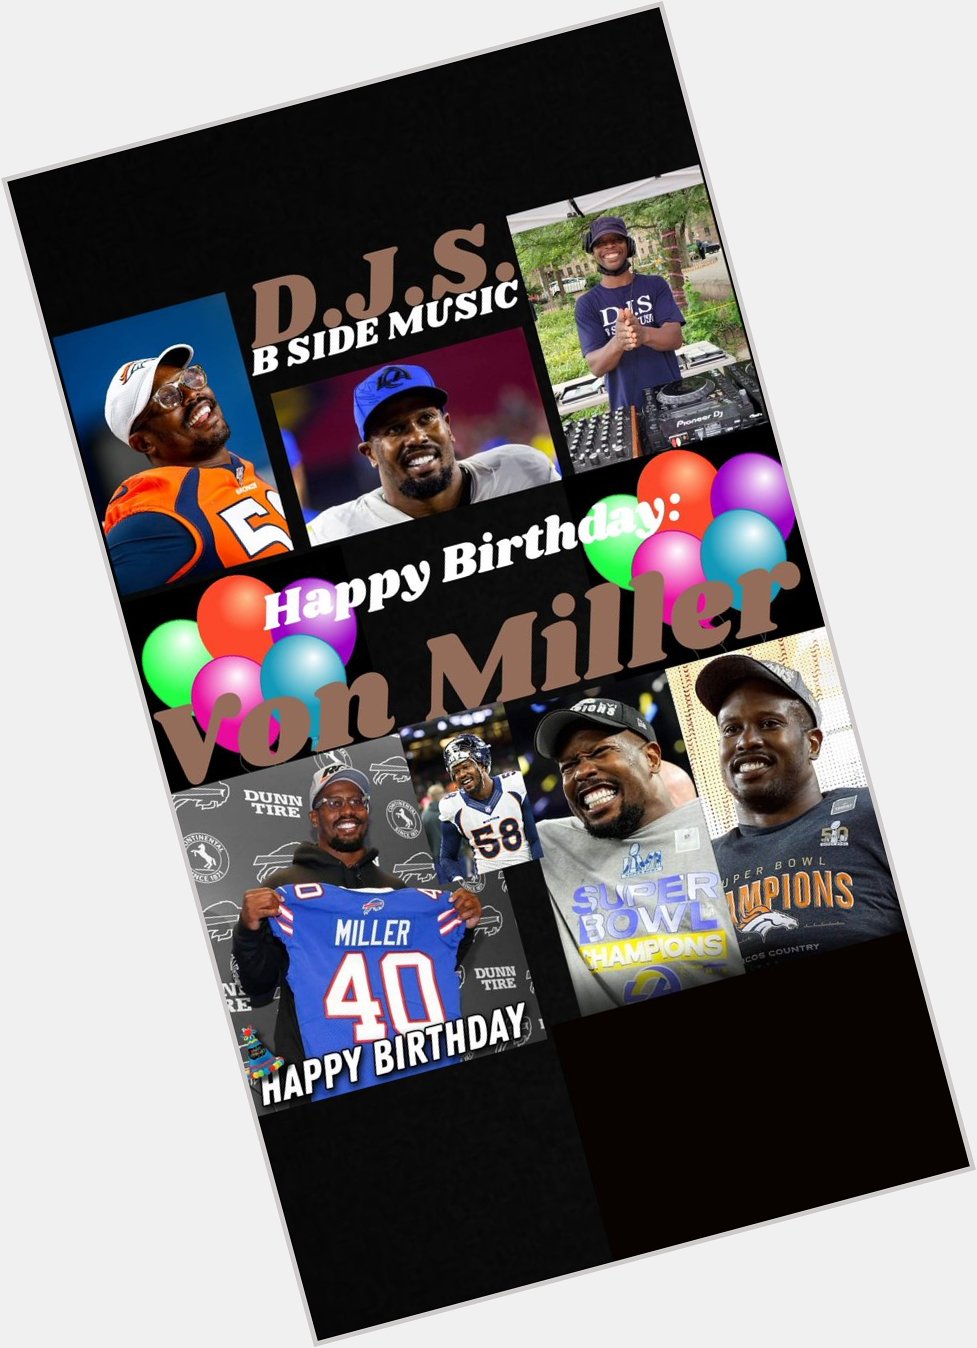 I(D.J.S.)\"B SIDE MUSIC\" saying Happy Birthday to NFL Football Player: \"VON MILLER\"!!!! 